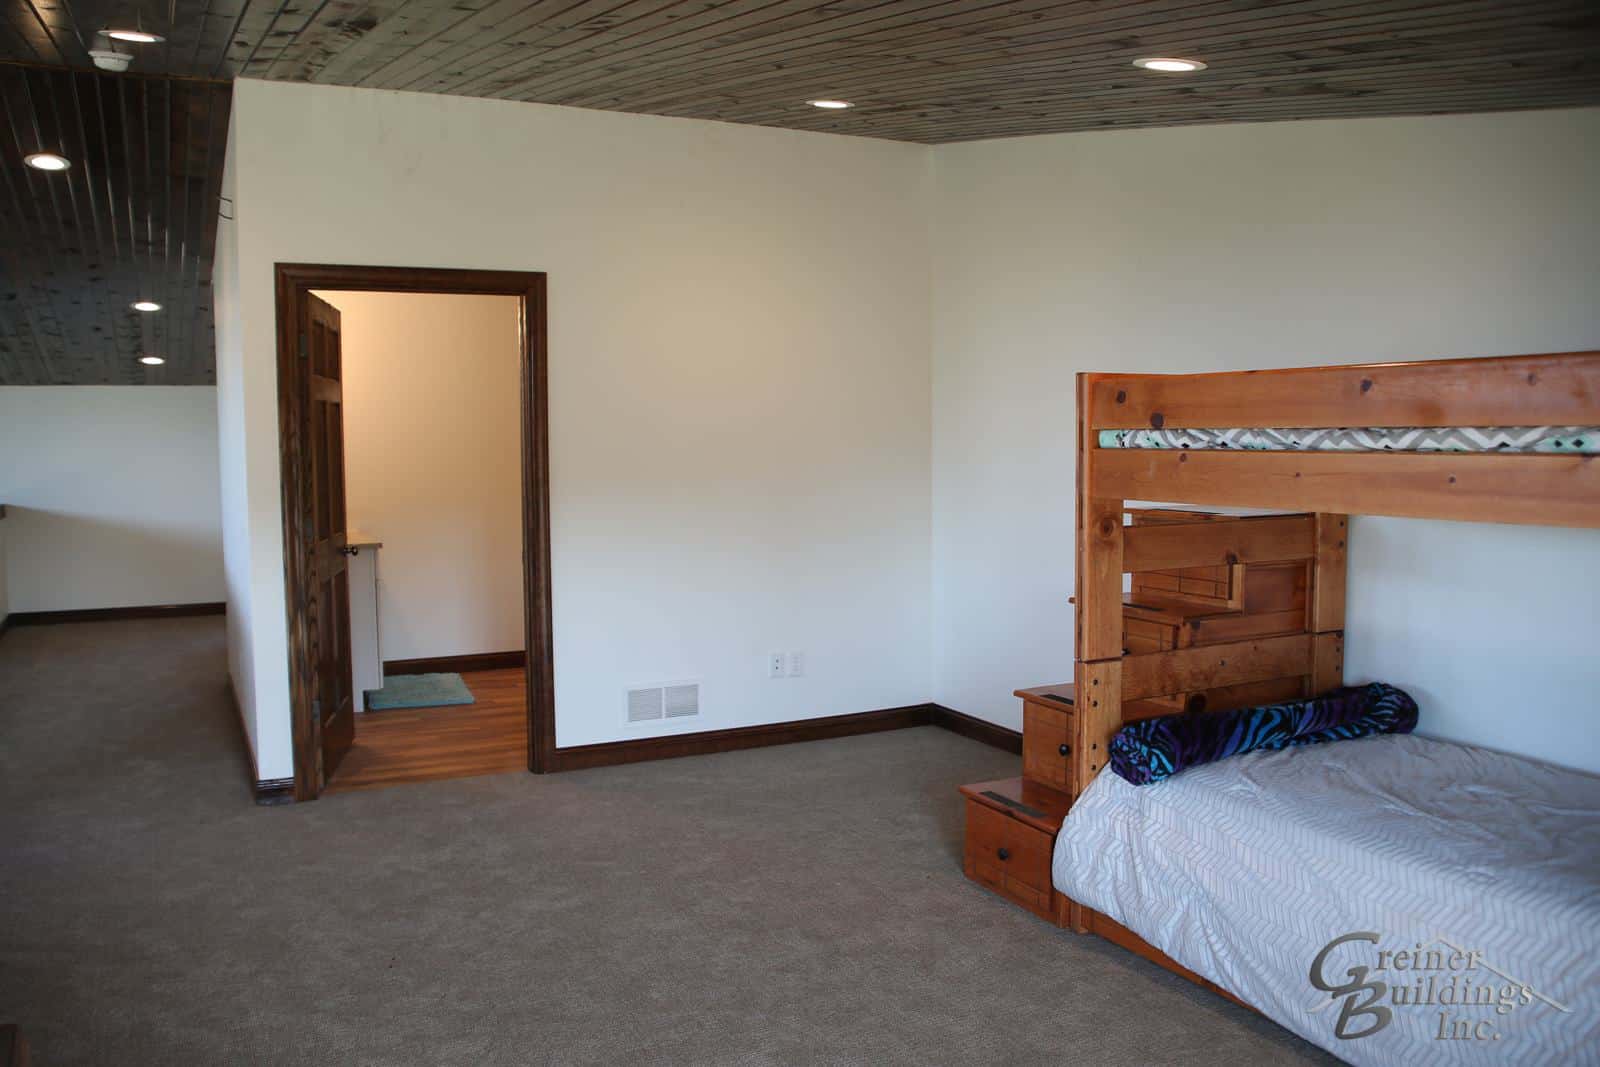 Shop Machine Shed Shome Man Cave Open Loft Bedroom Muscatine, Iowa built by Greiner Buildings